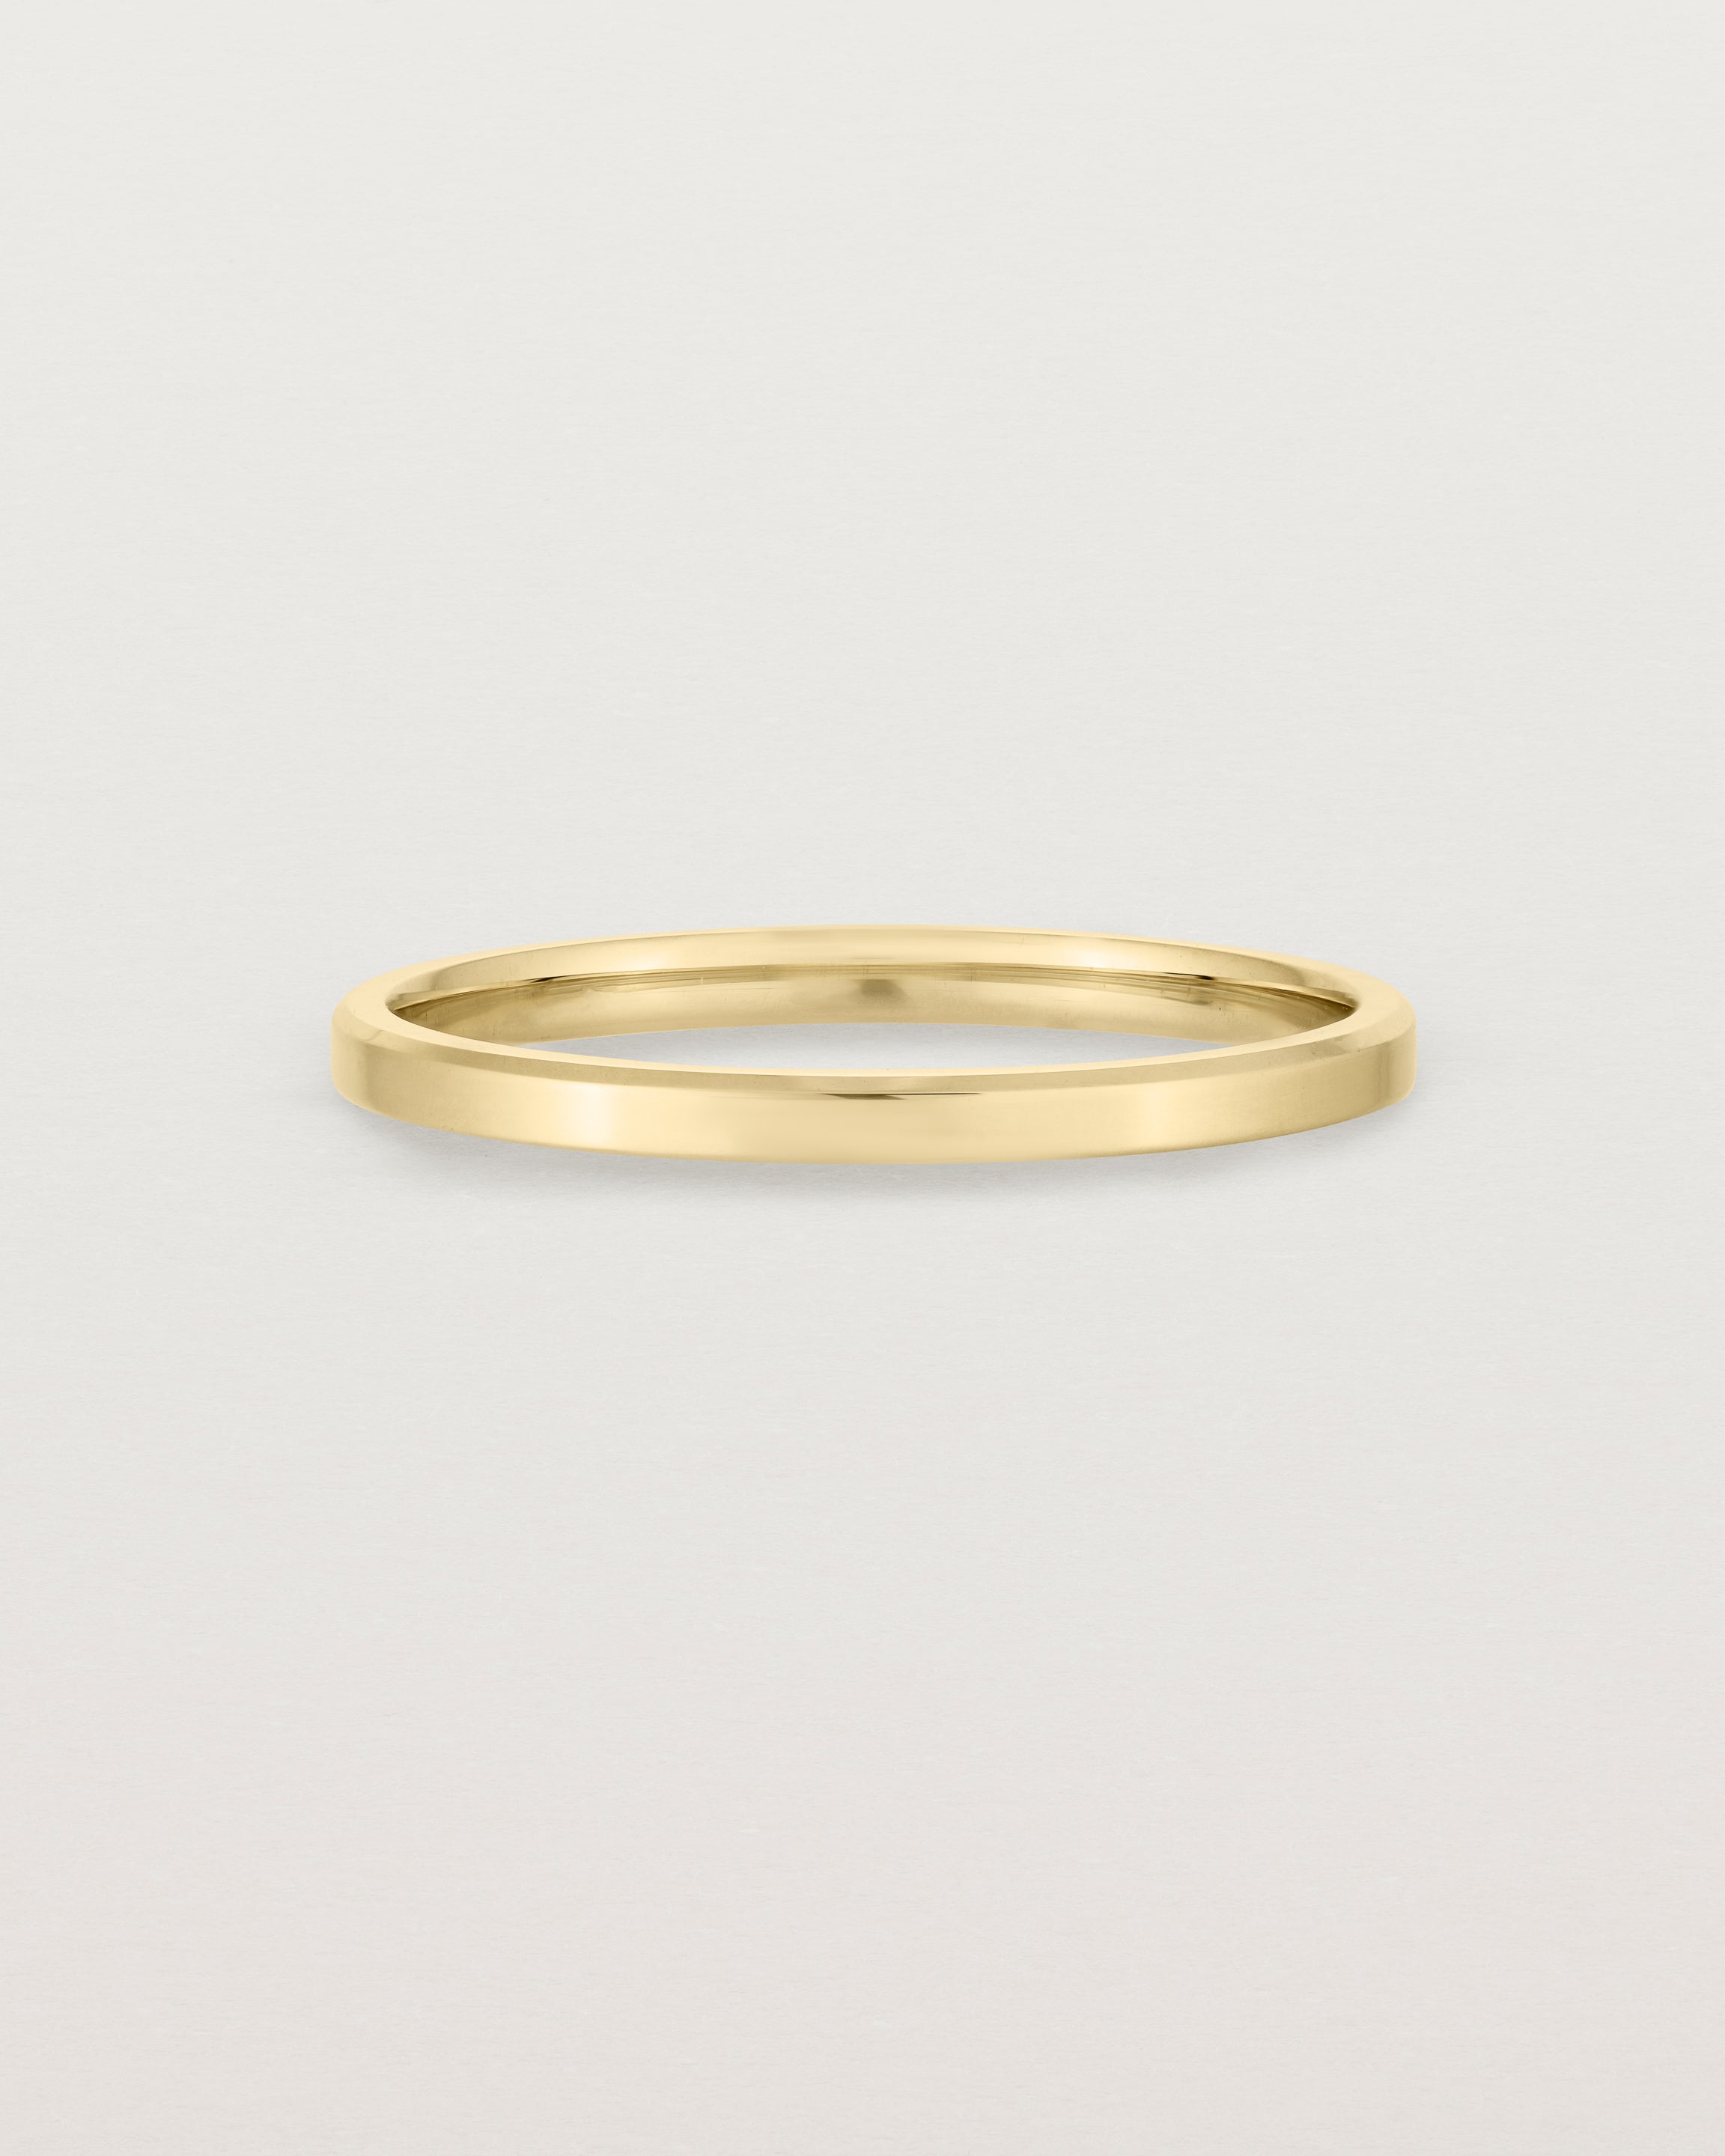 2mm yellow gold wedding band with a chamfered edge